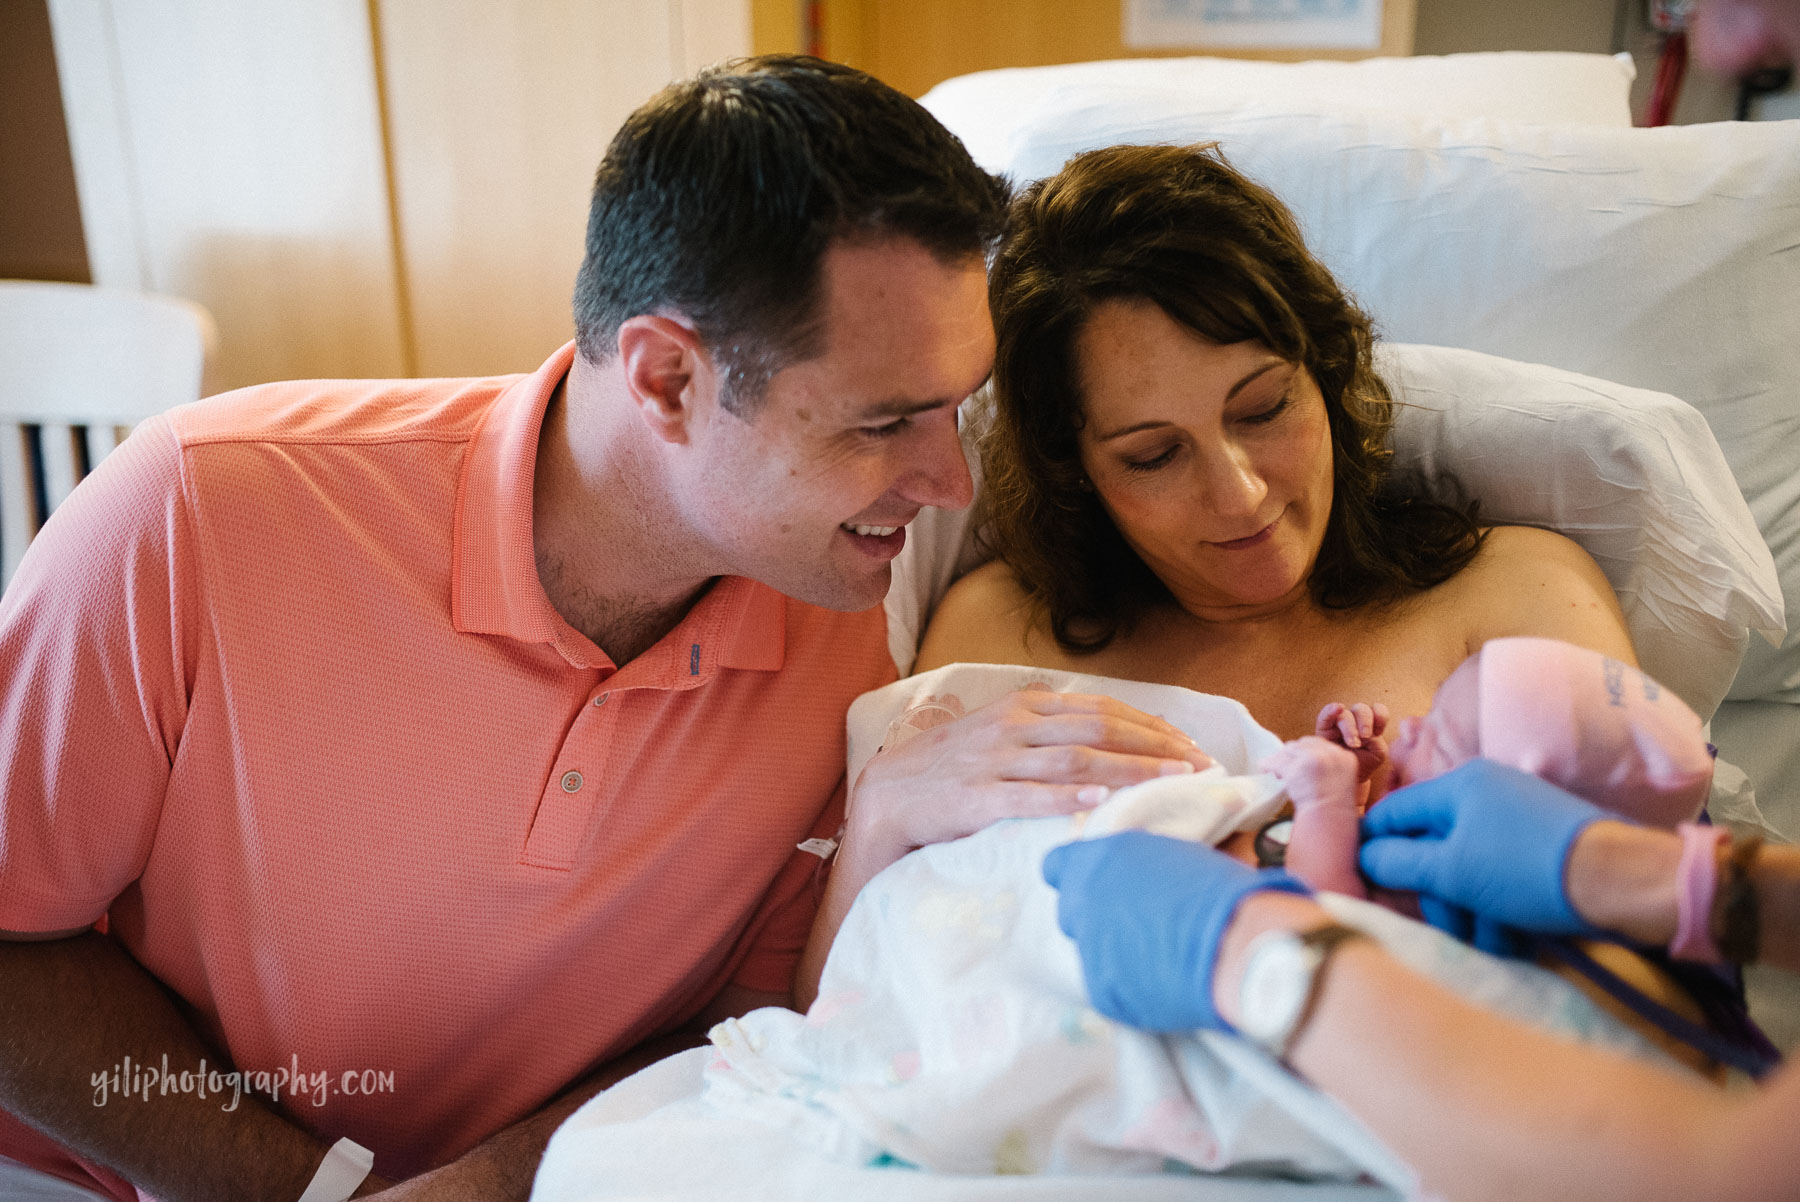 mom and dad in hospital room with newborn baby girl admiring her